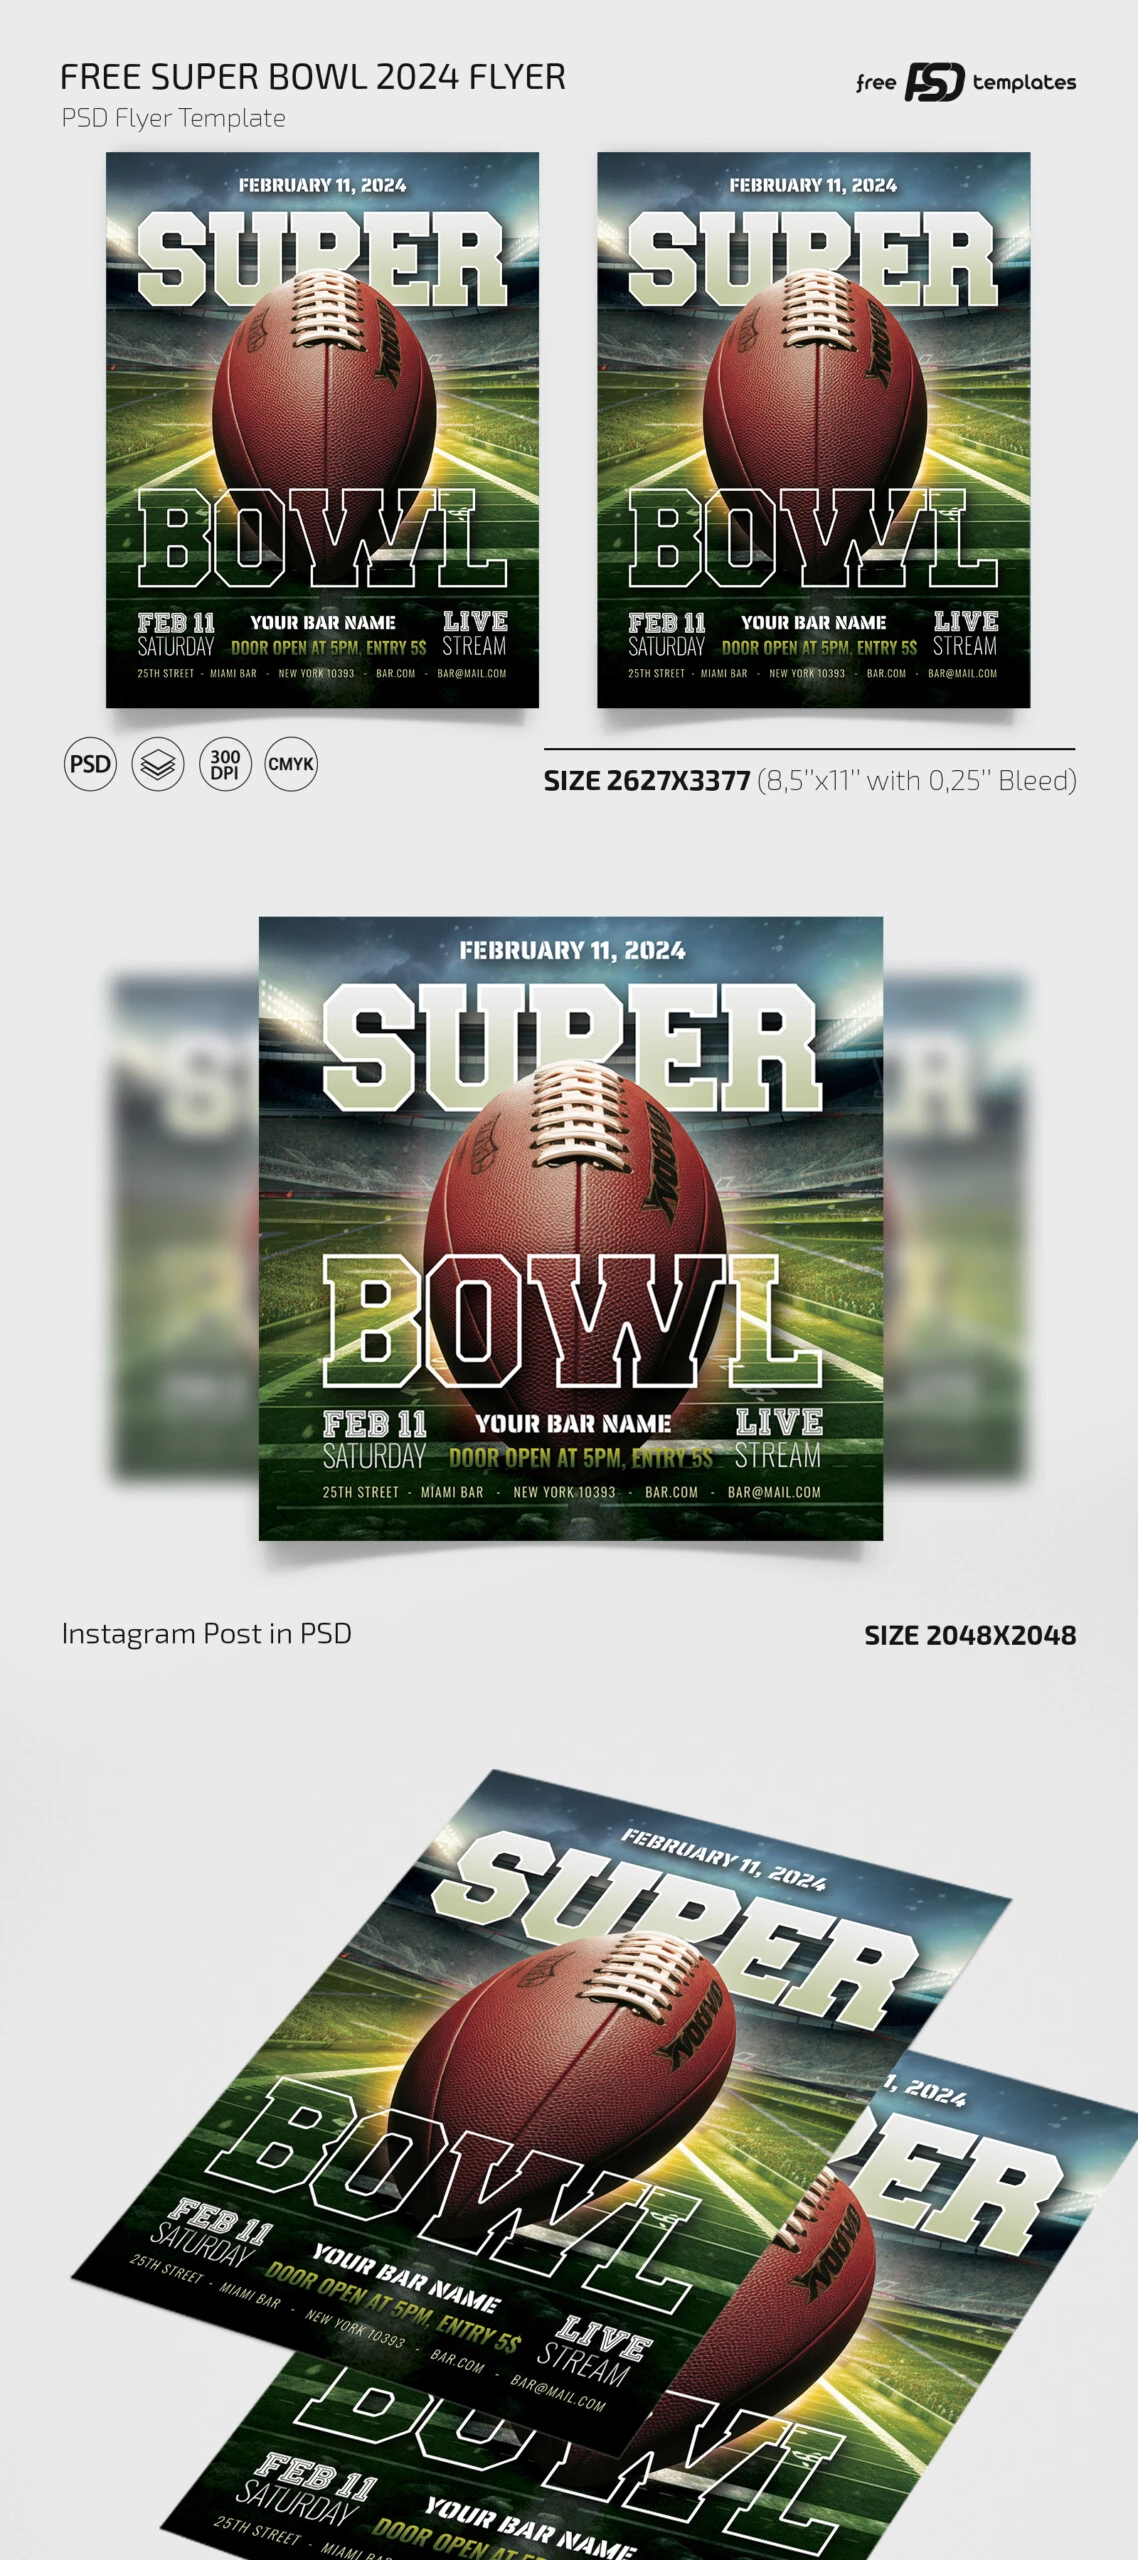 Free Super Bowl 2024 Flyer PSD Template